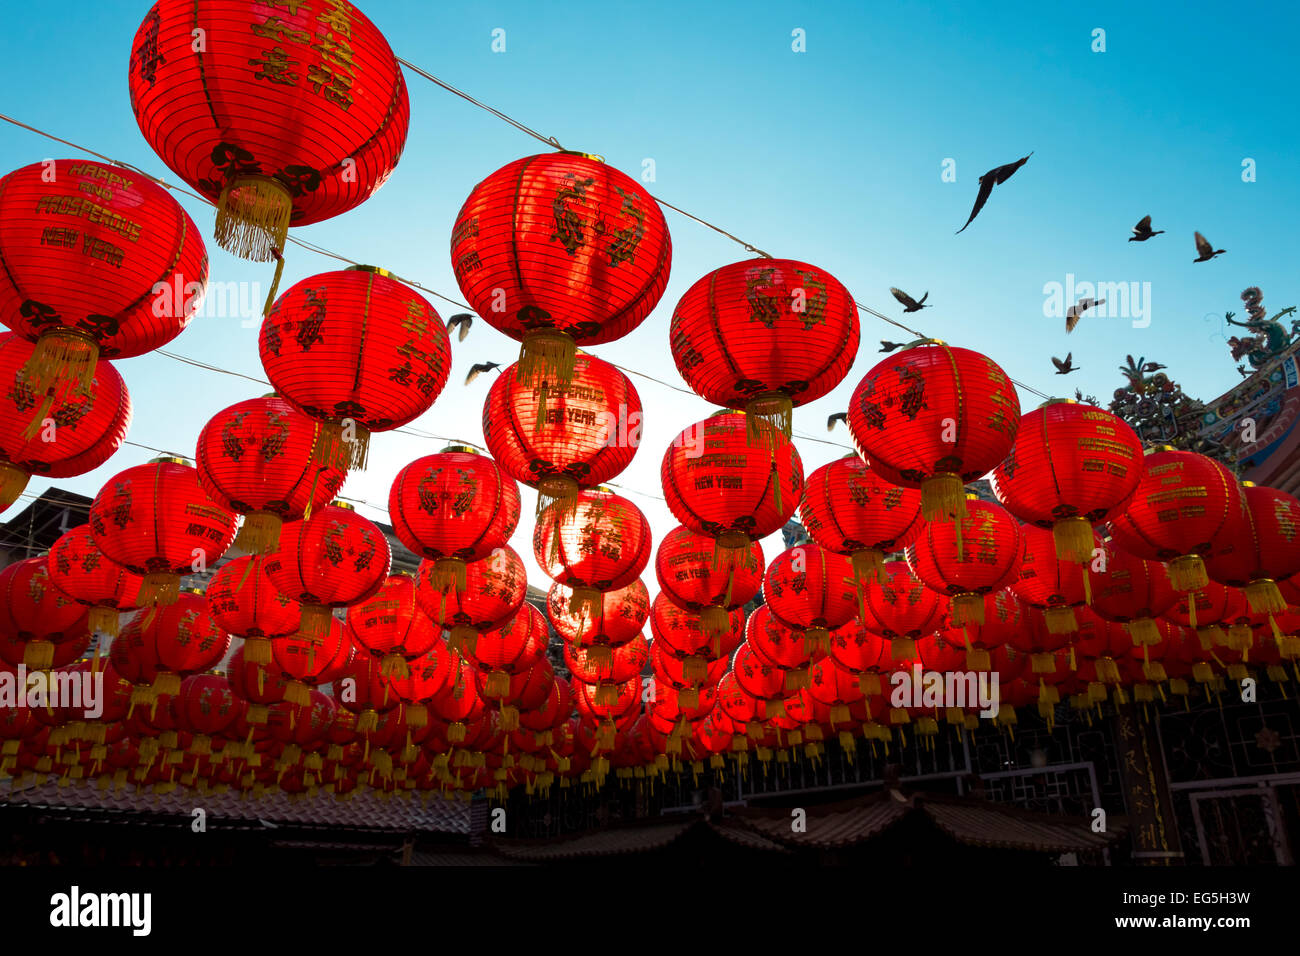 Chinese Lanterns over clear blue sky with birds flying Stock Photo